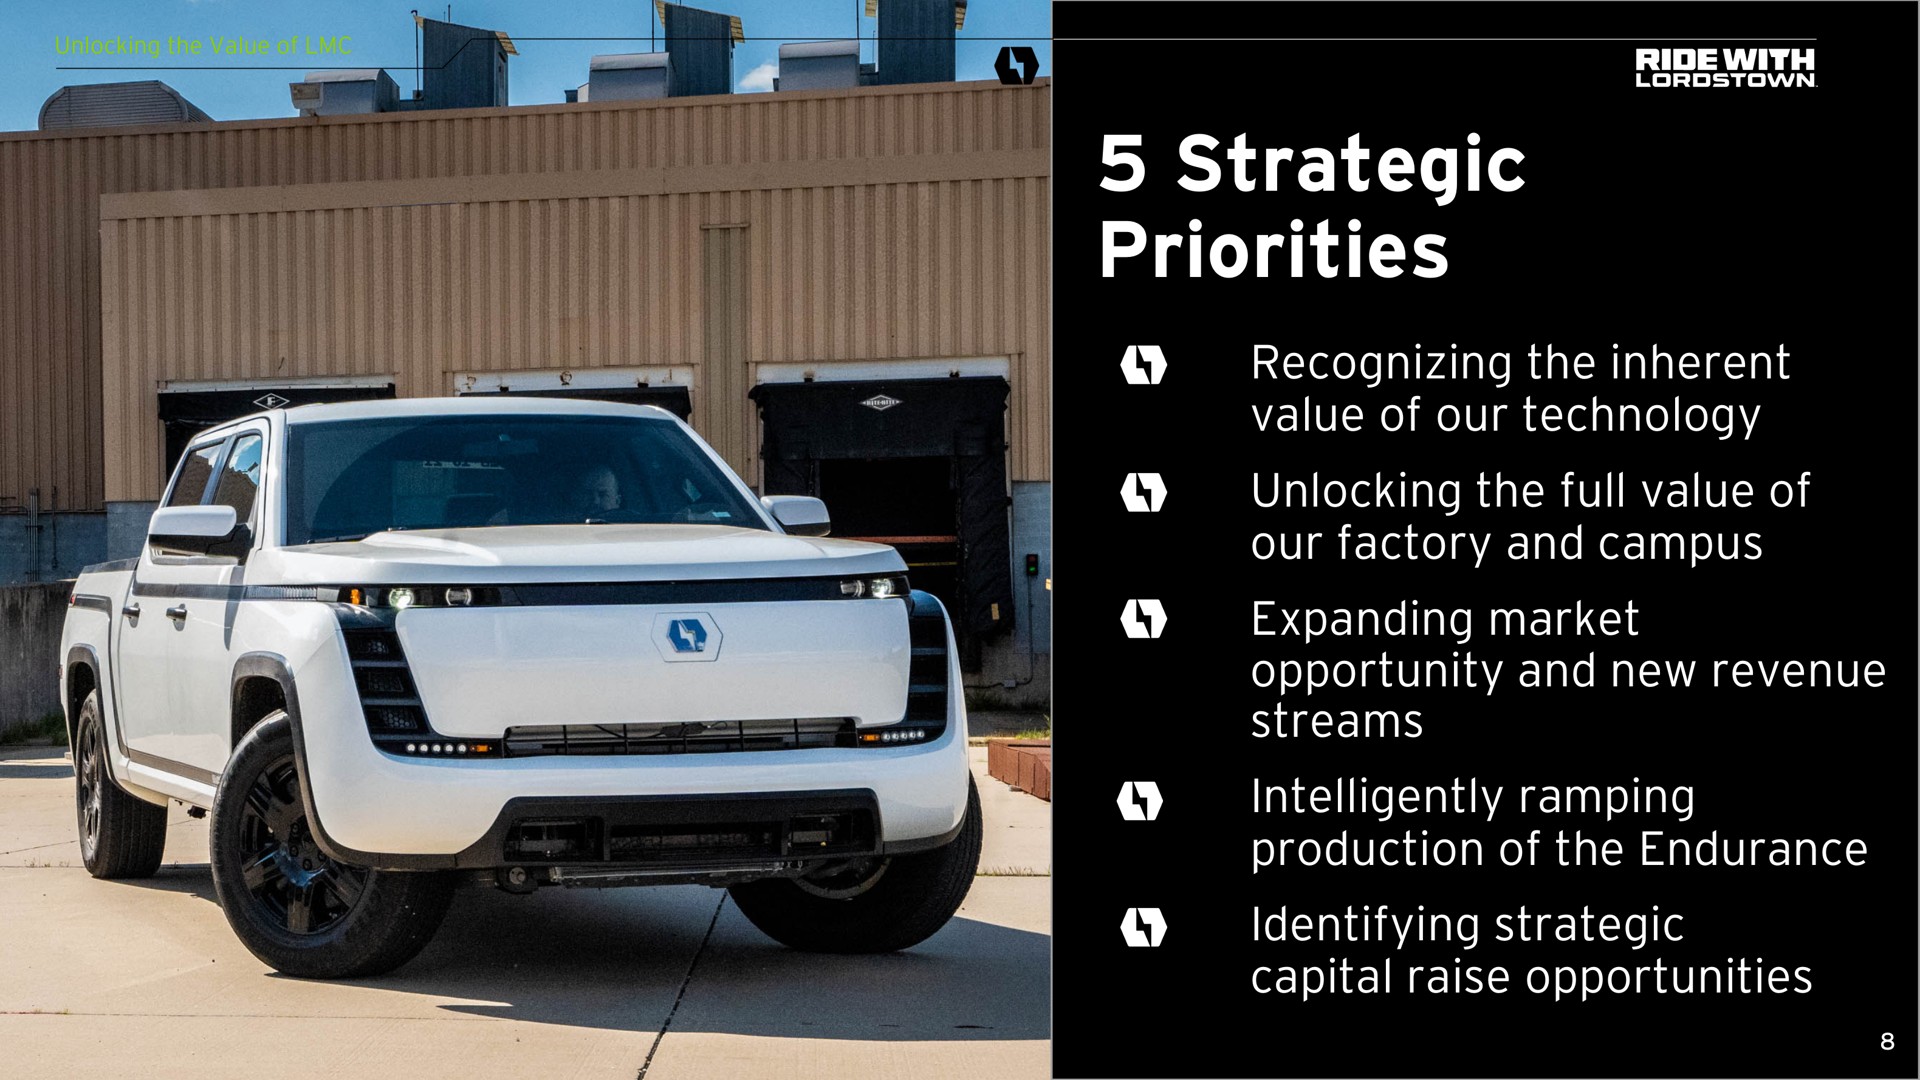 strategic priorities recognizing the inherent value of our technology unlocking the full value of our factory and campus expanding market opportunity and new revenue streams intelligently ramping production of the endurance identifying strategic capital raise opportunities | Lordstown Motors